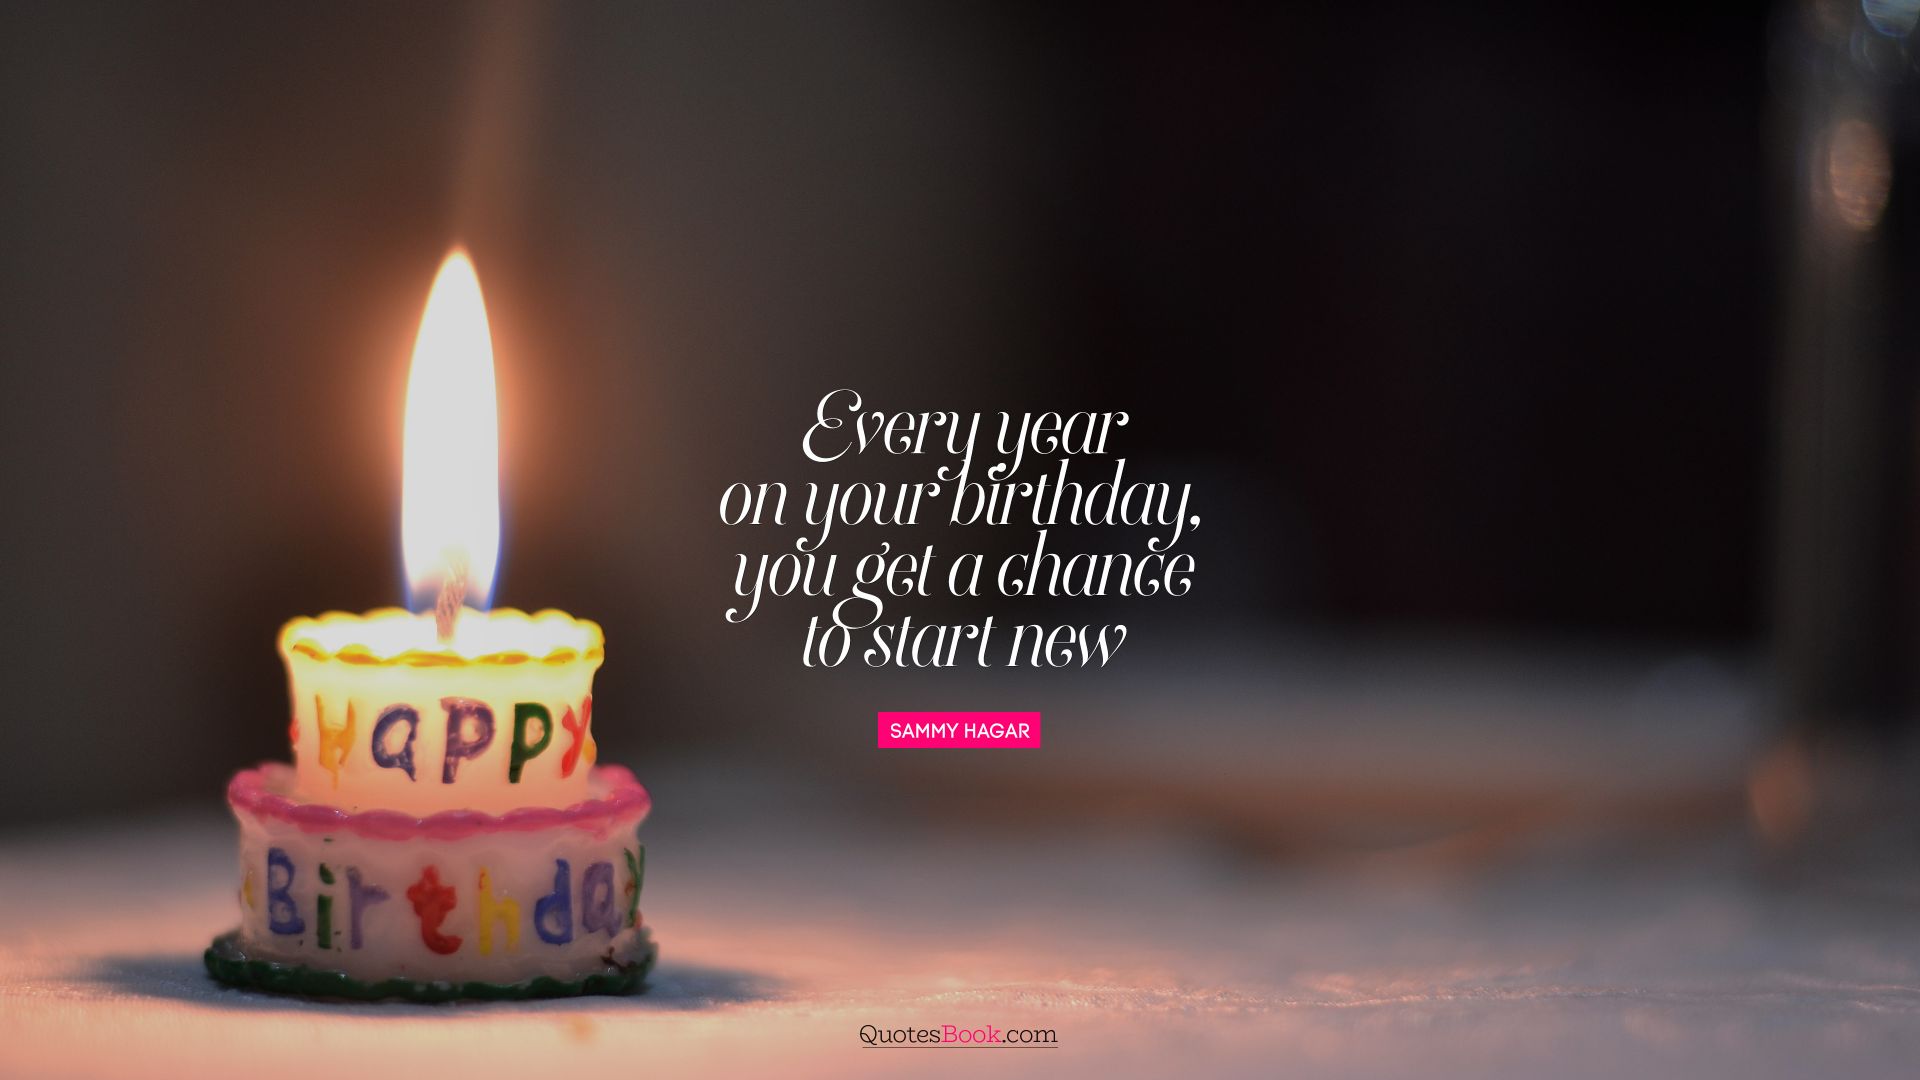 Every year on your birthday, you get a chance to start new. - Quote by Sammy Hagar